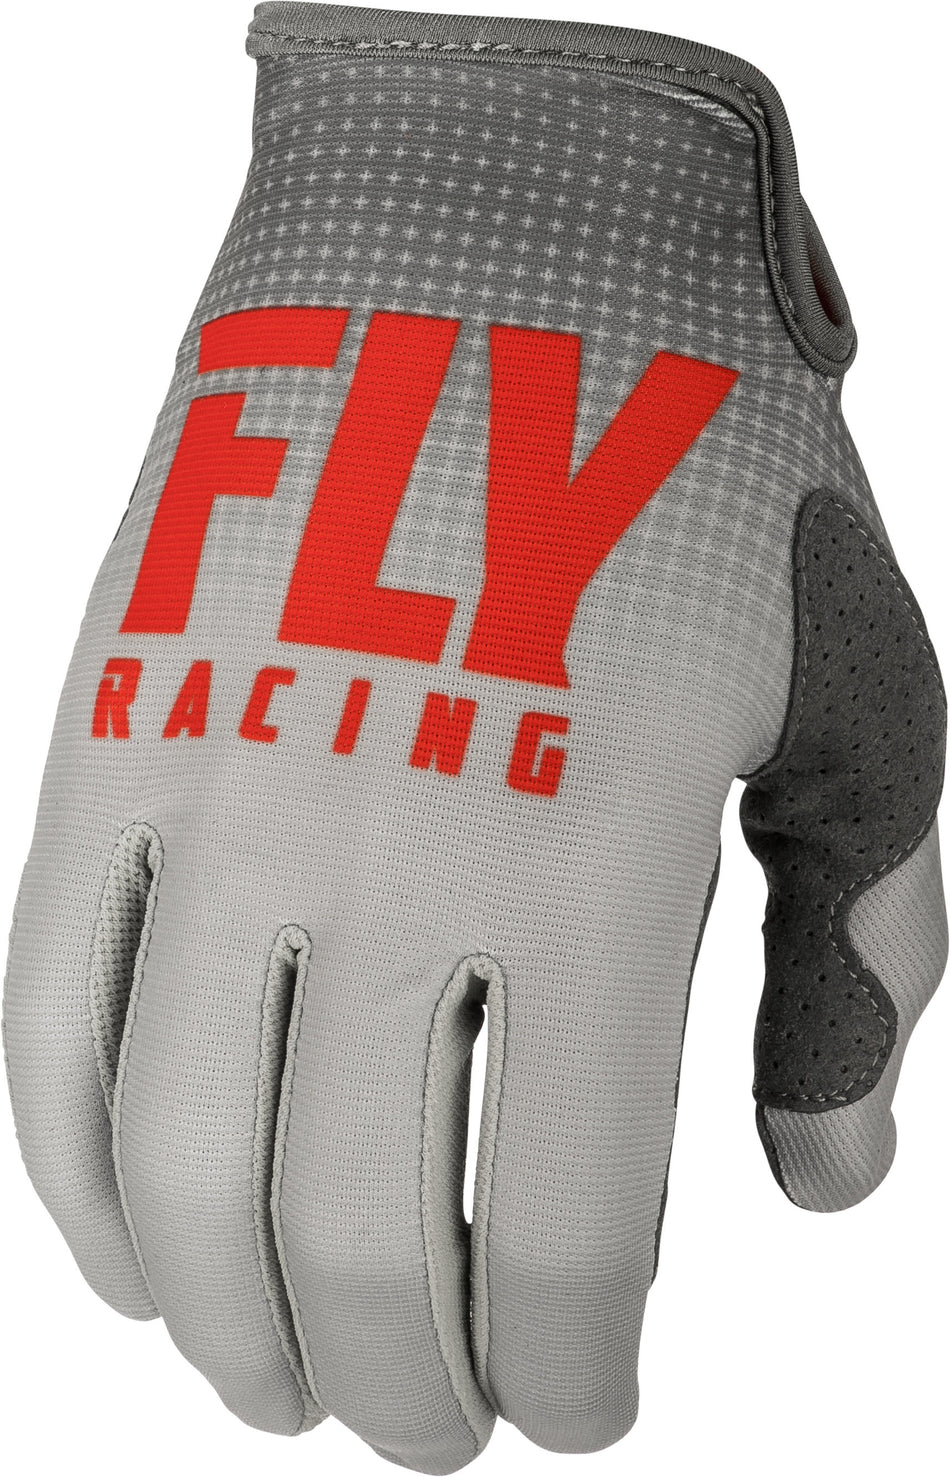 FLY RACING Lite Gloves Red/Grey Sz 05 372-01205